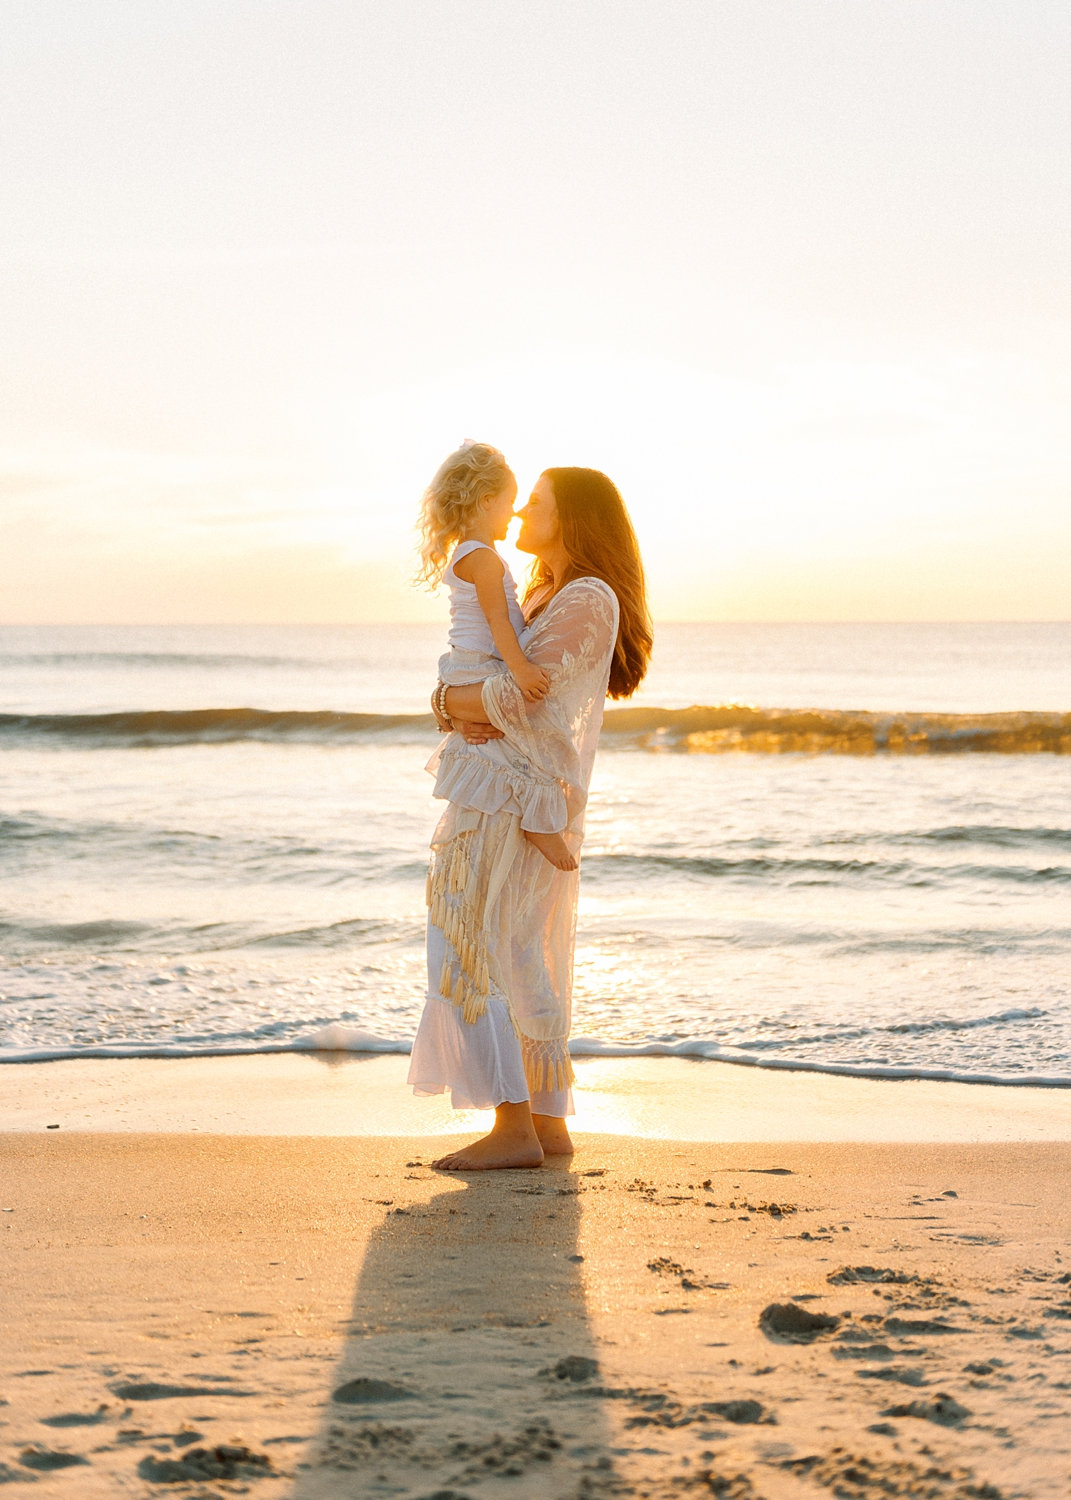 mom holding her young daughter, they are touching noses and silhouetted by the ocean sunrise behind them